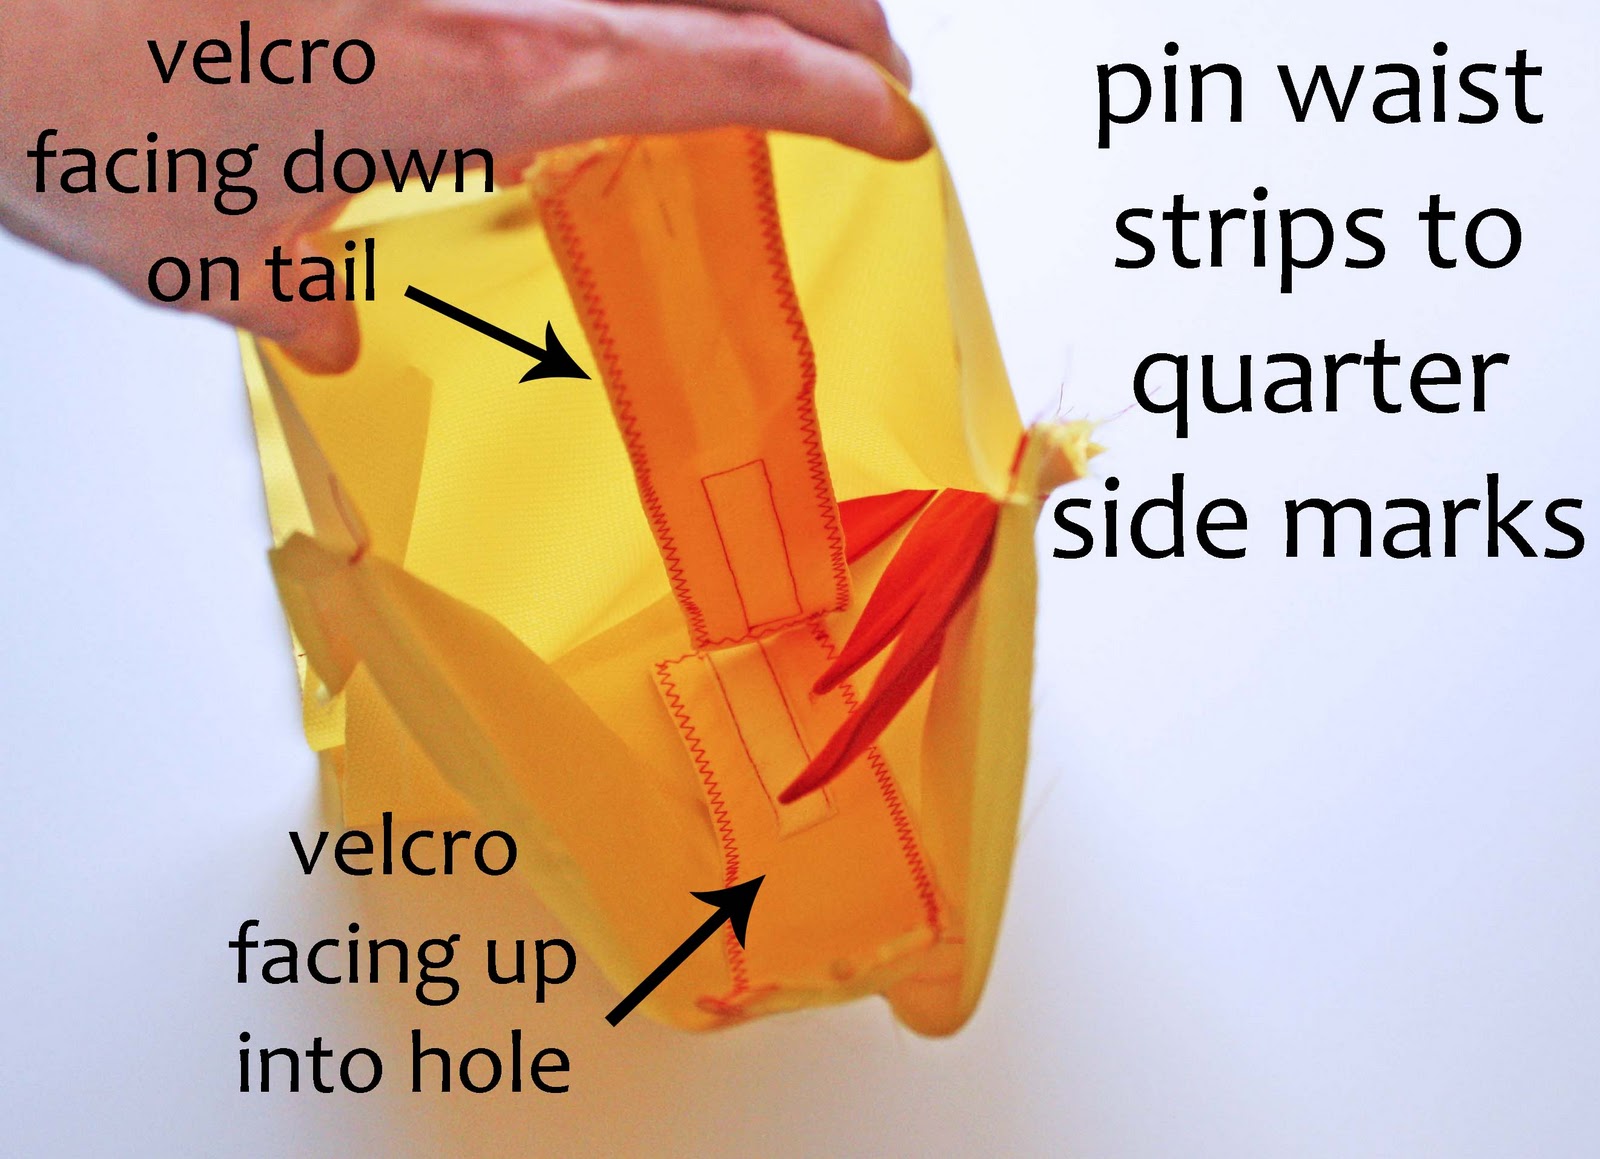 pin waist strips to quarter side marks.